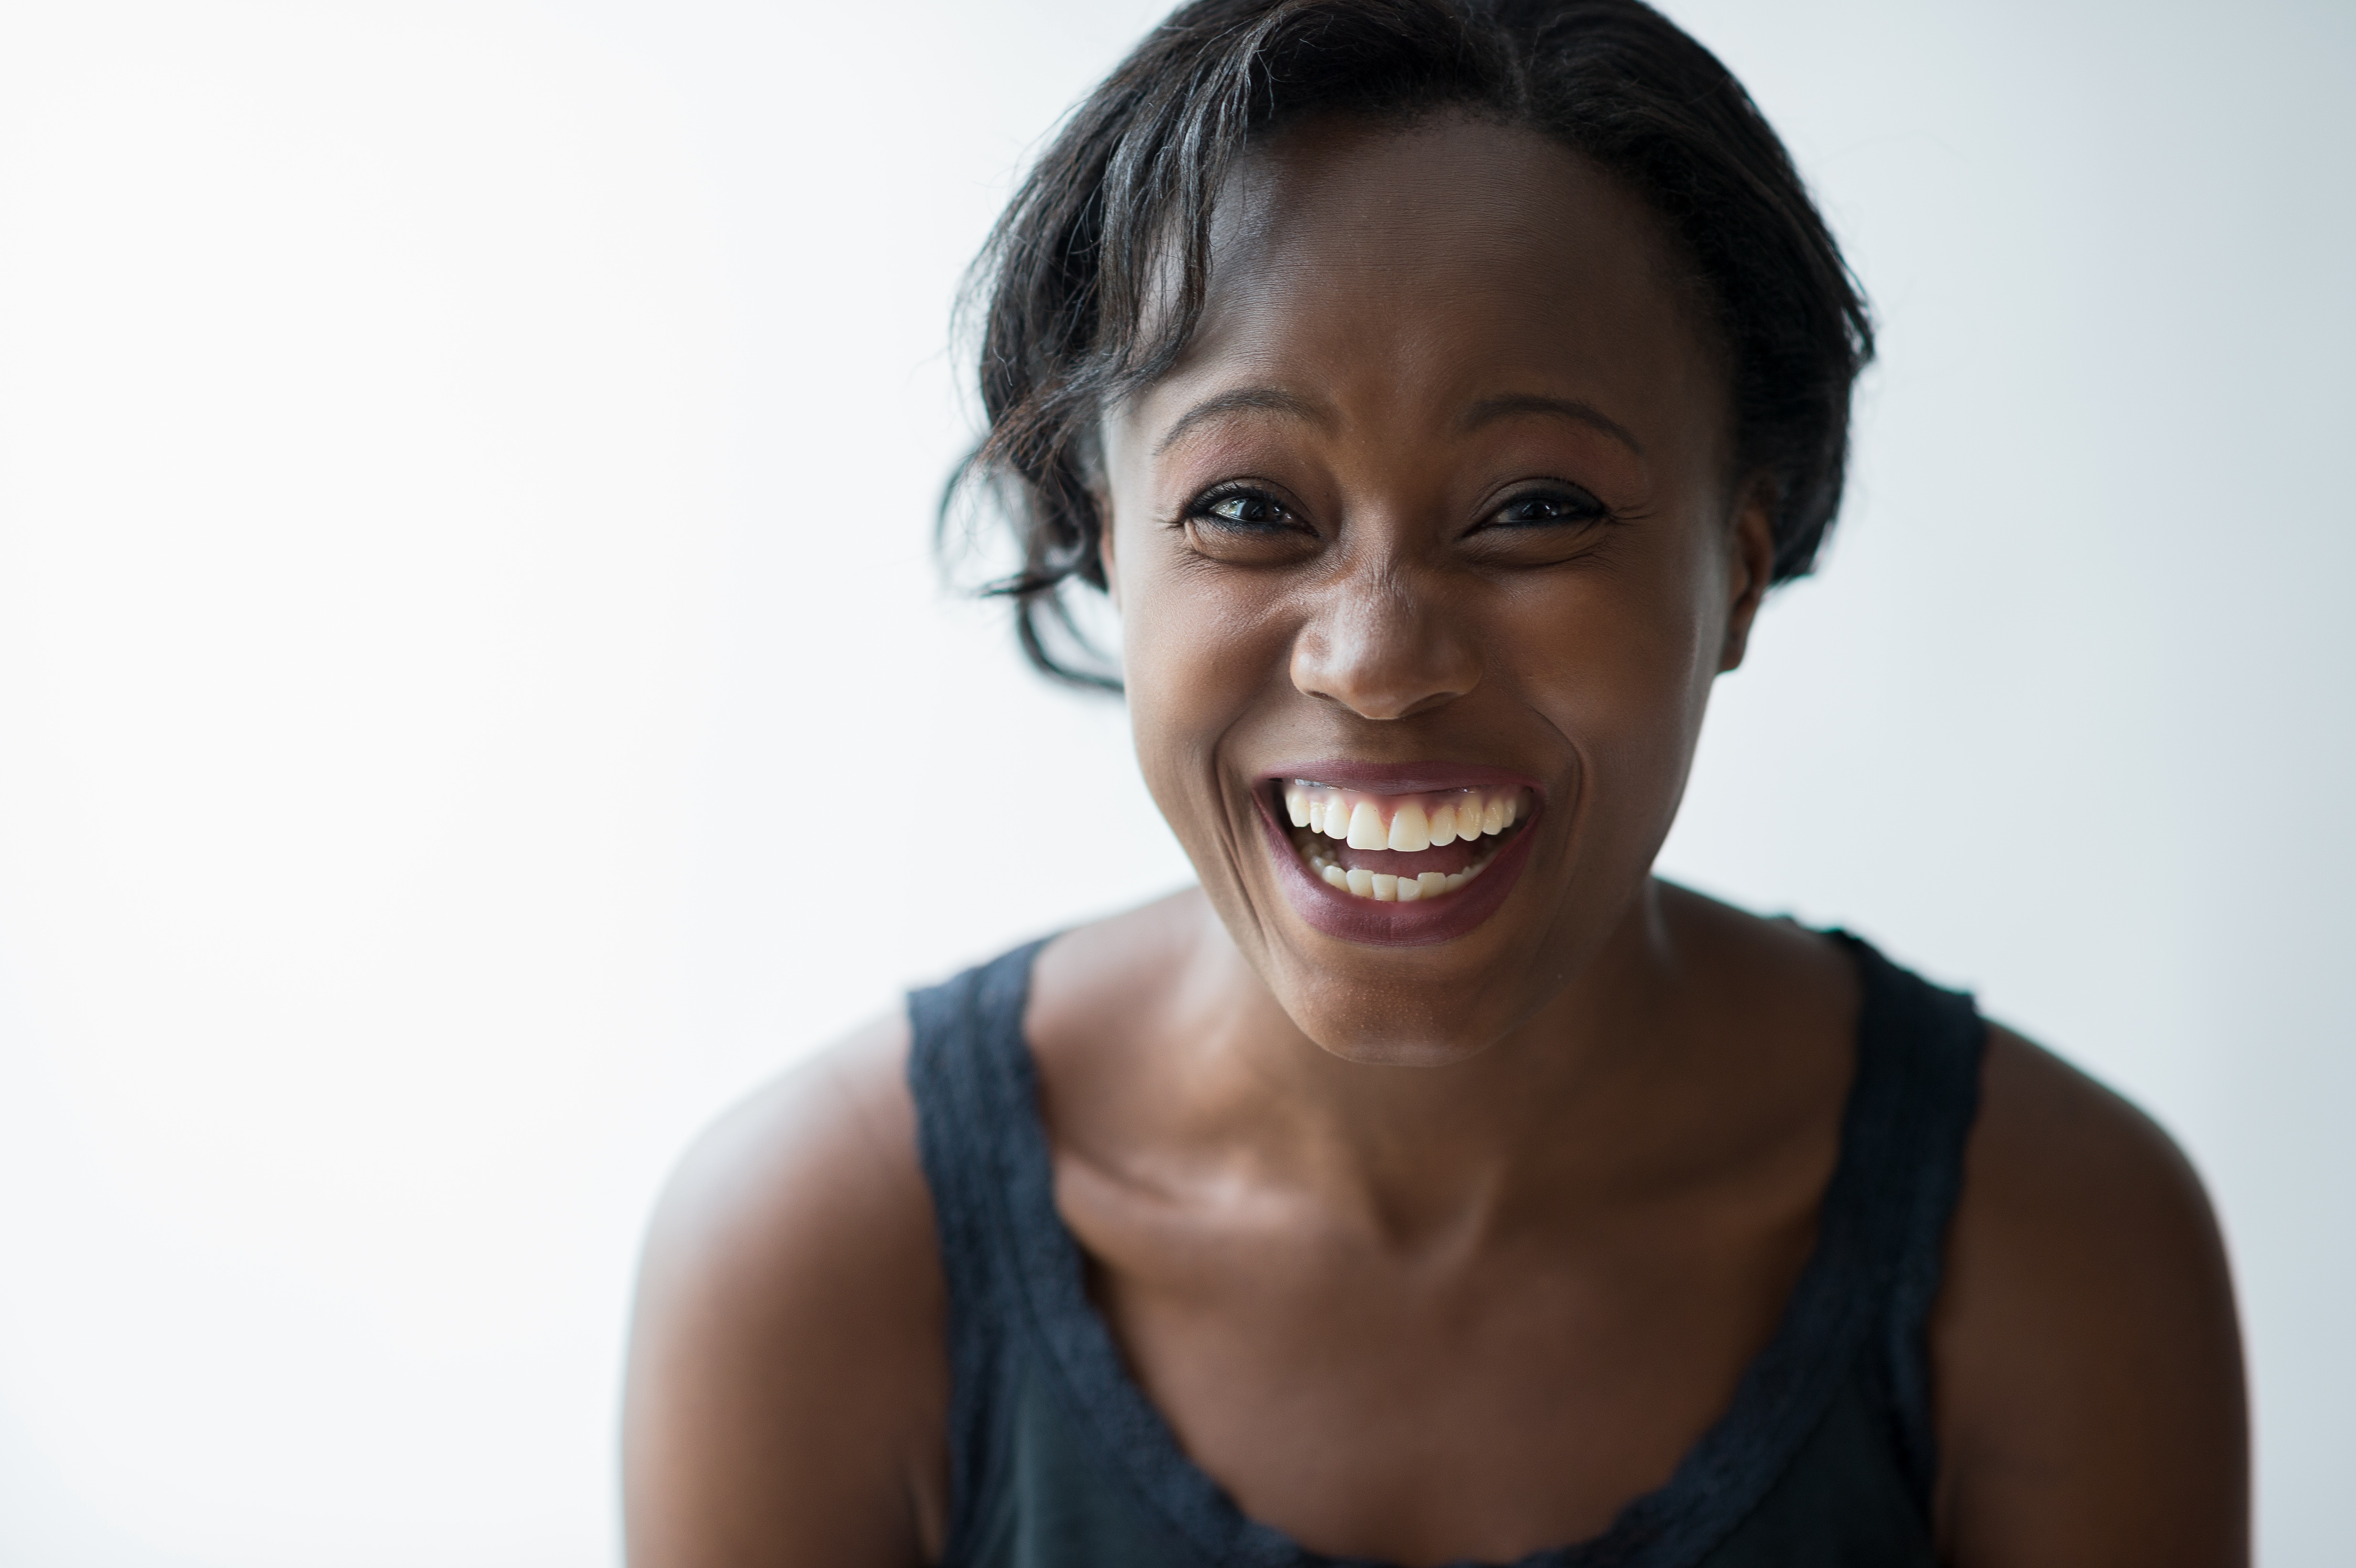 4928x3280 portrait, smile, face, lady, laughter, black woman, minimal, happiness, woman, laugh, smiling, female, Free image, emotion, happy, laughing, joy. Mocah HD Wallpaper